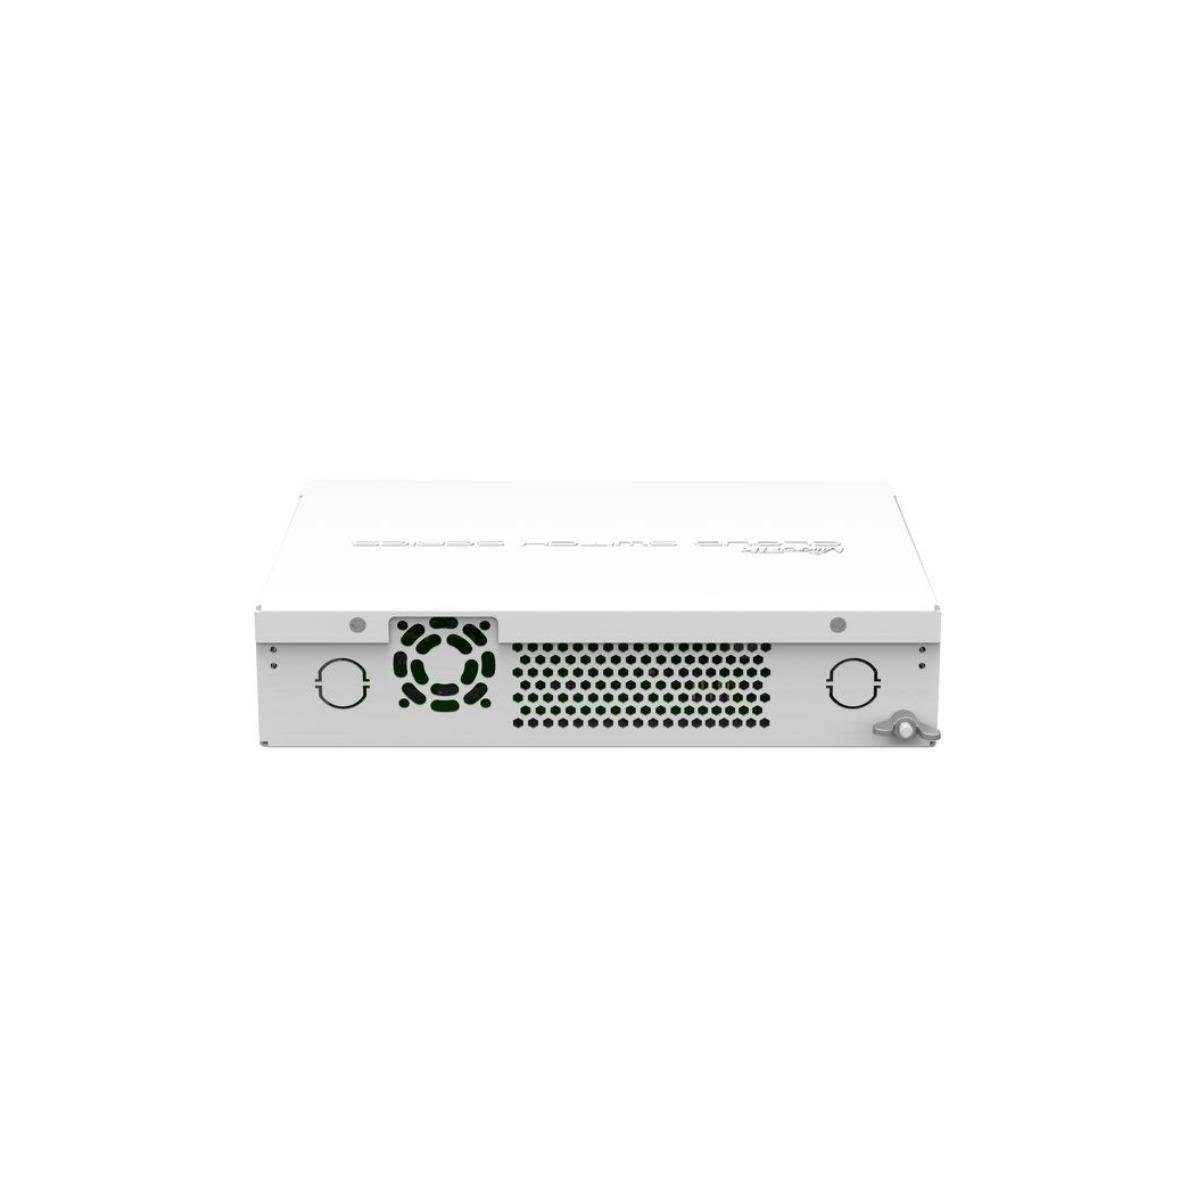 4 5 MikroTik OS CRS112-8G-4S-IN 400 SFP, 128 8-Port, Router MHz, Netzwerk-Switch MB, -